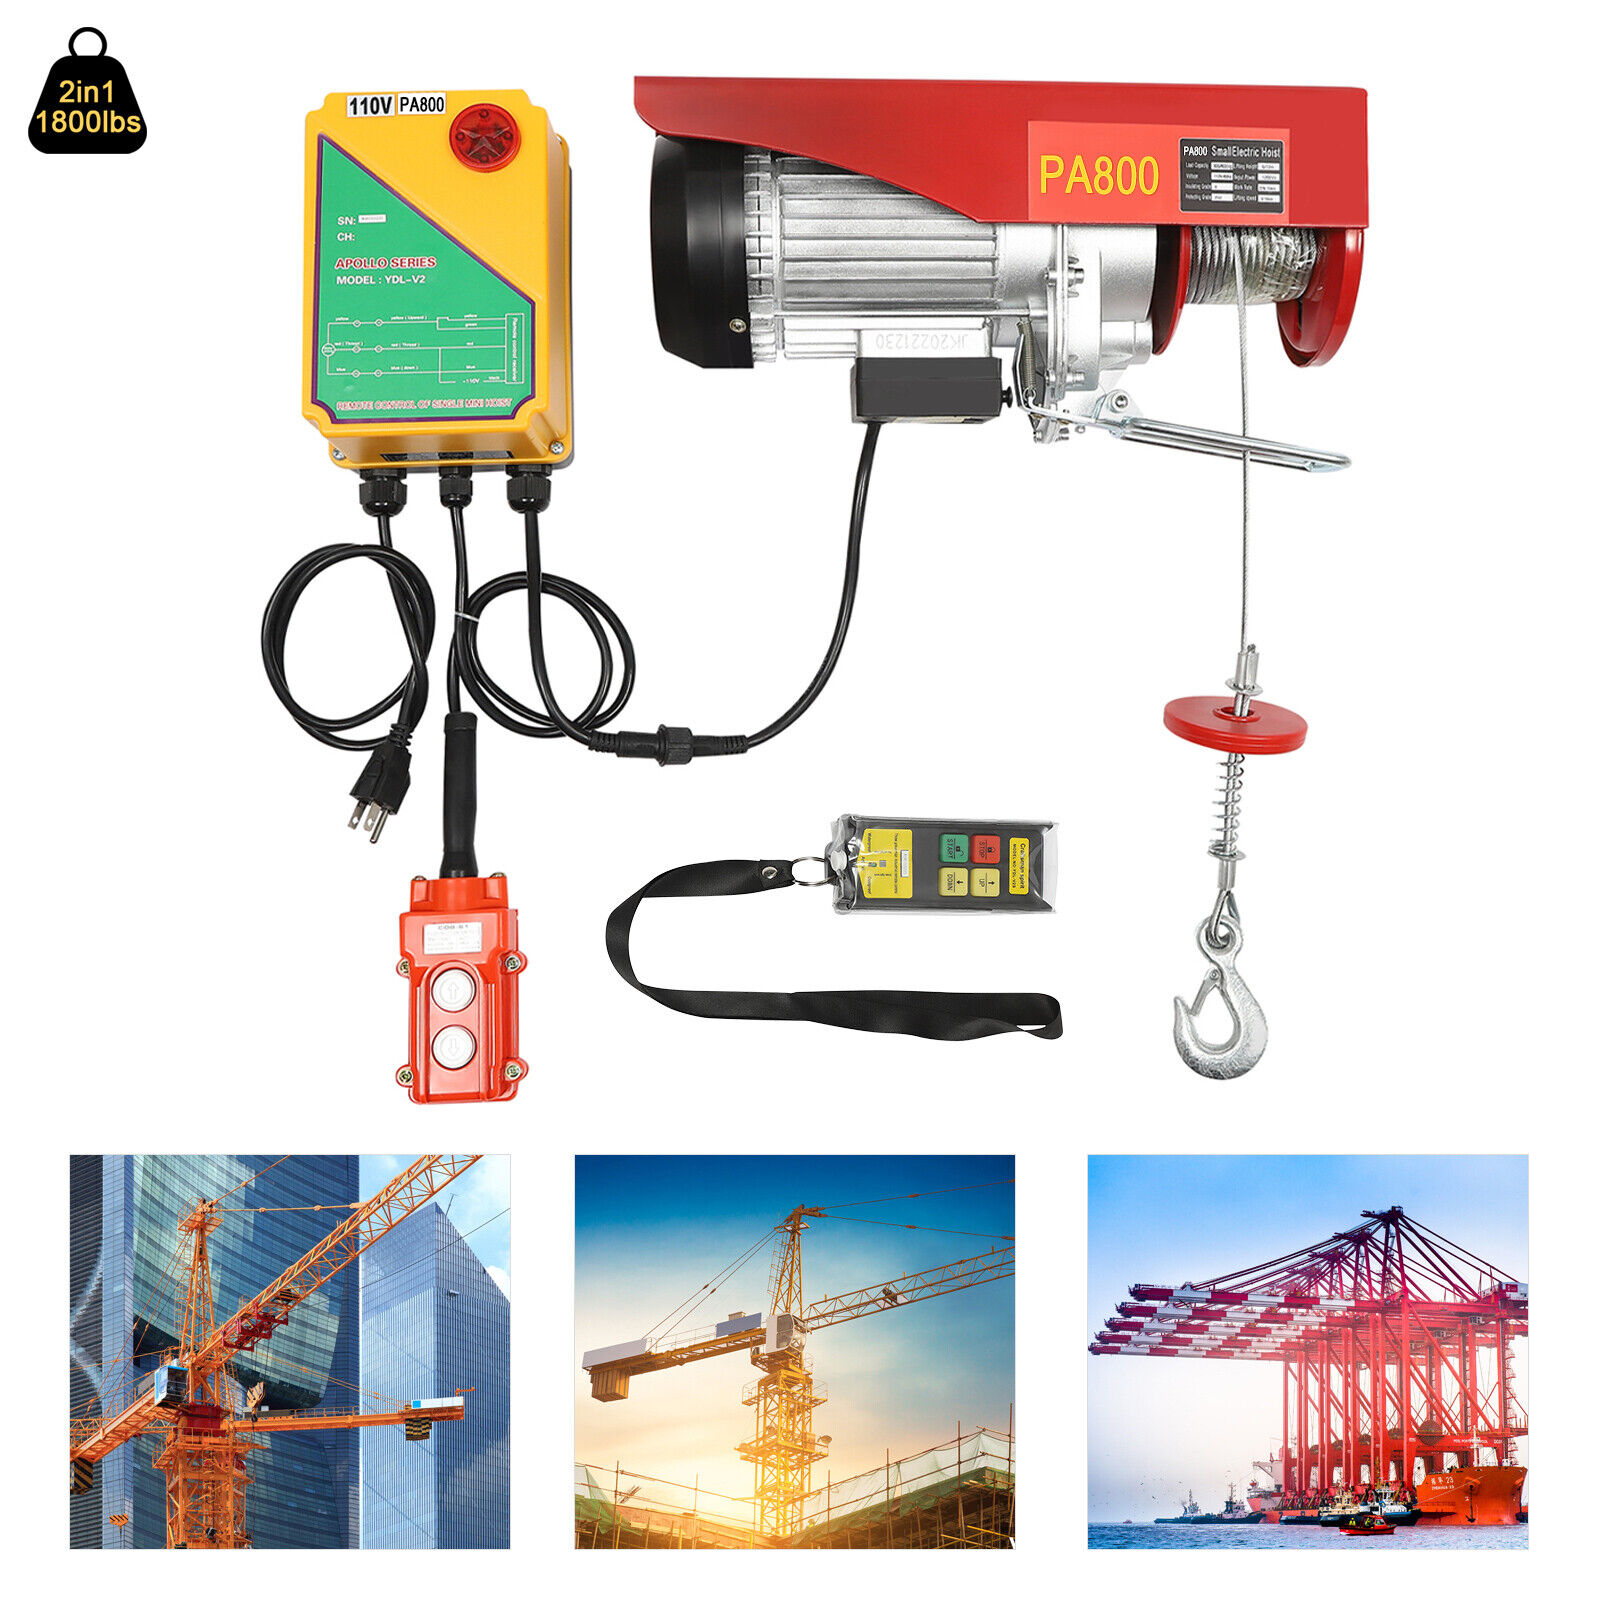 PA800 Electric Wire Hoist Winch Engine Crane Overhead Lift Wired Remote Control